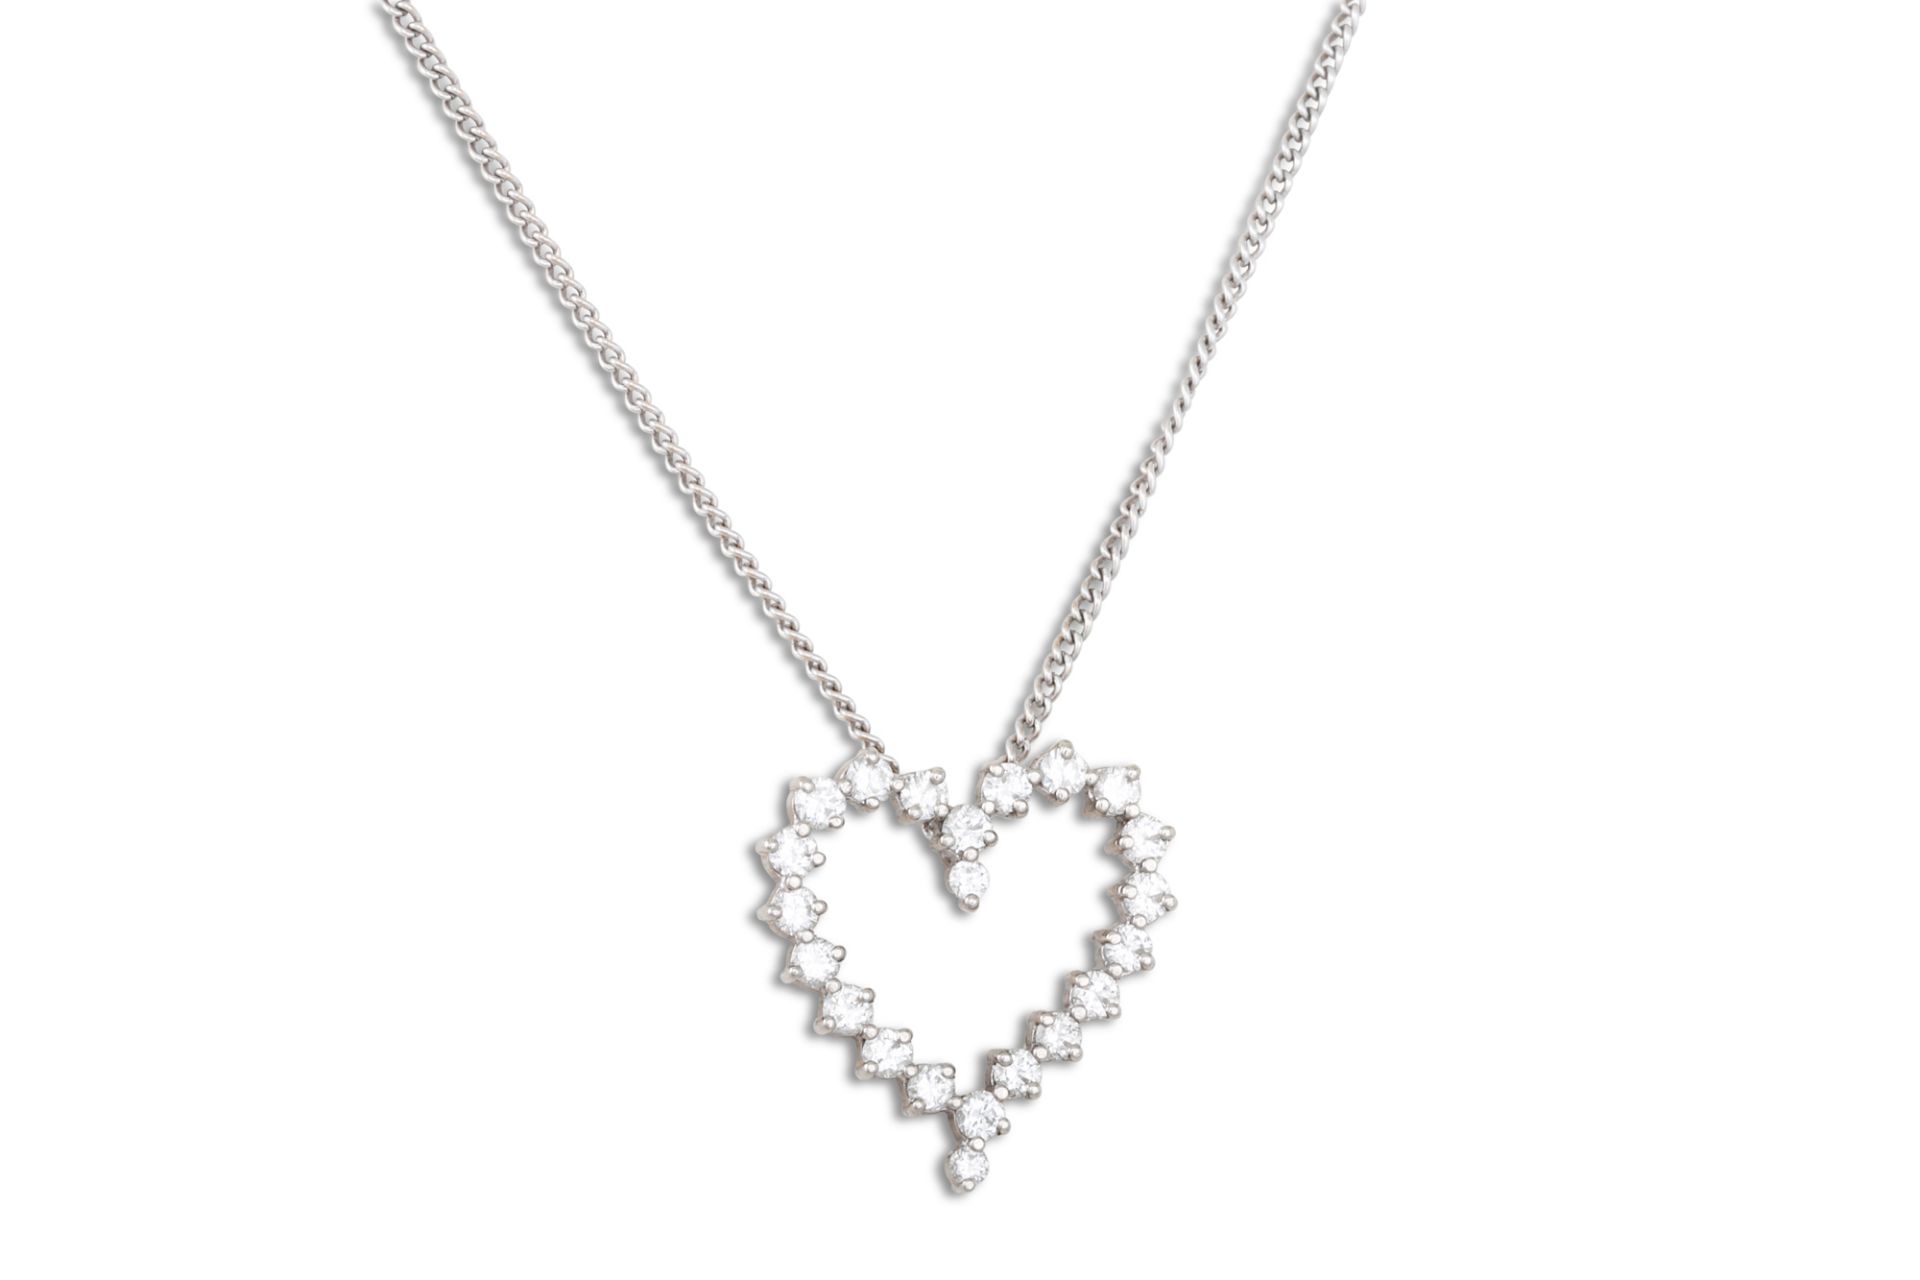 A DIAMOND PENDANT, the heart shaped pendant mounted in 18ct white gold, on a chain. Estimated: